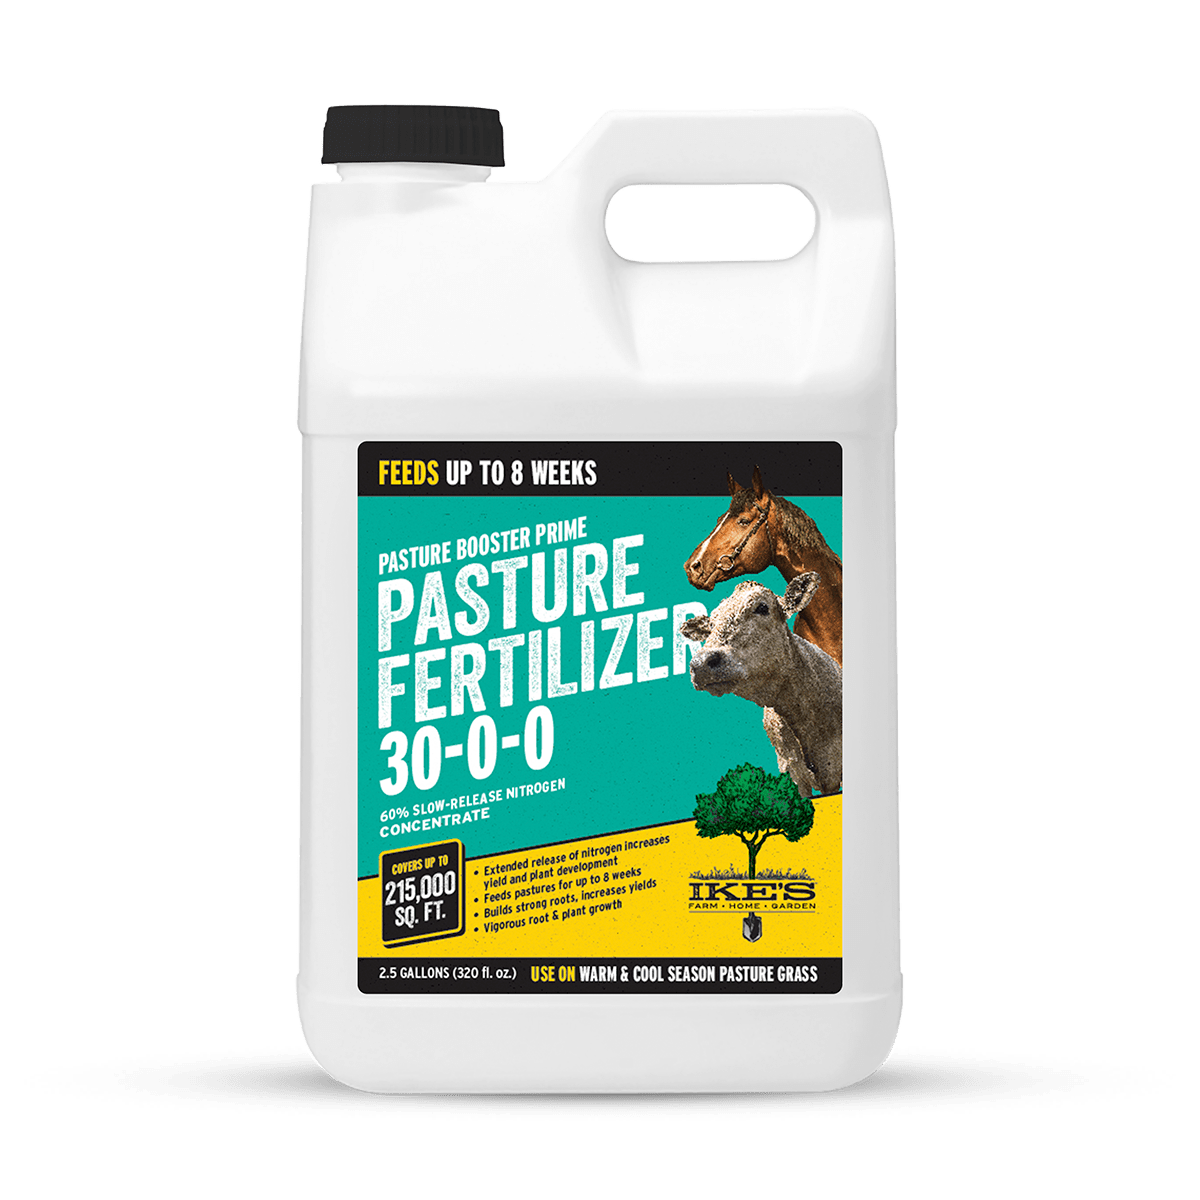 container of IKE'S Pasture Booster Prime Pasture Fertilizer 30-0-0